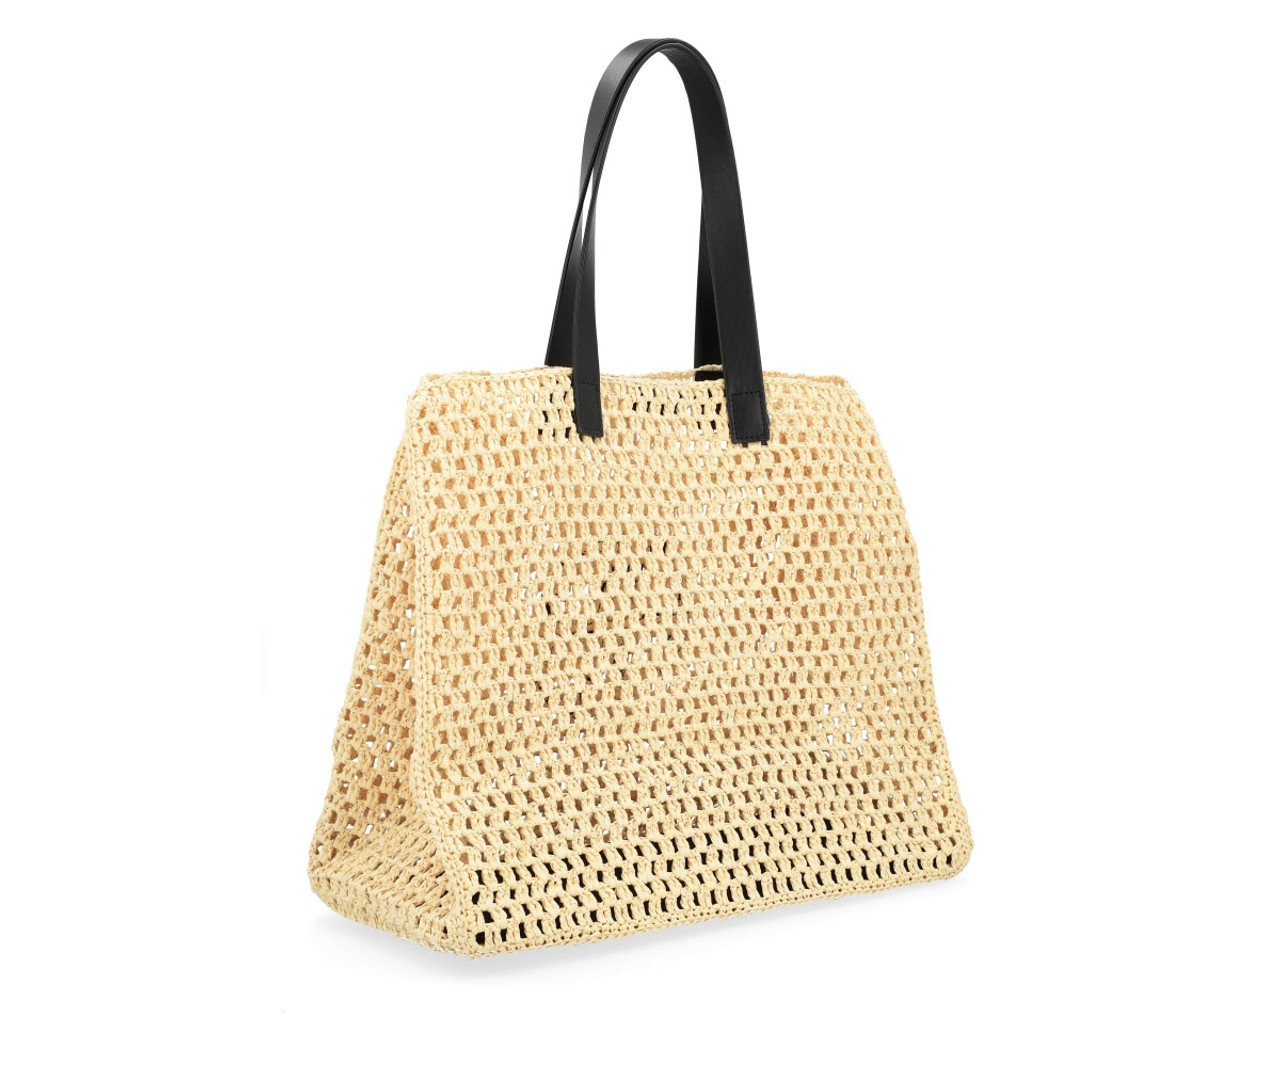 ANINE BING Large Rio Tote in Natural